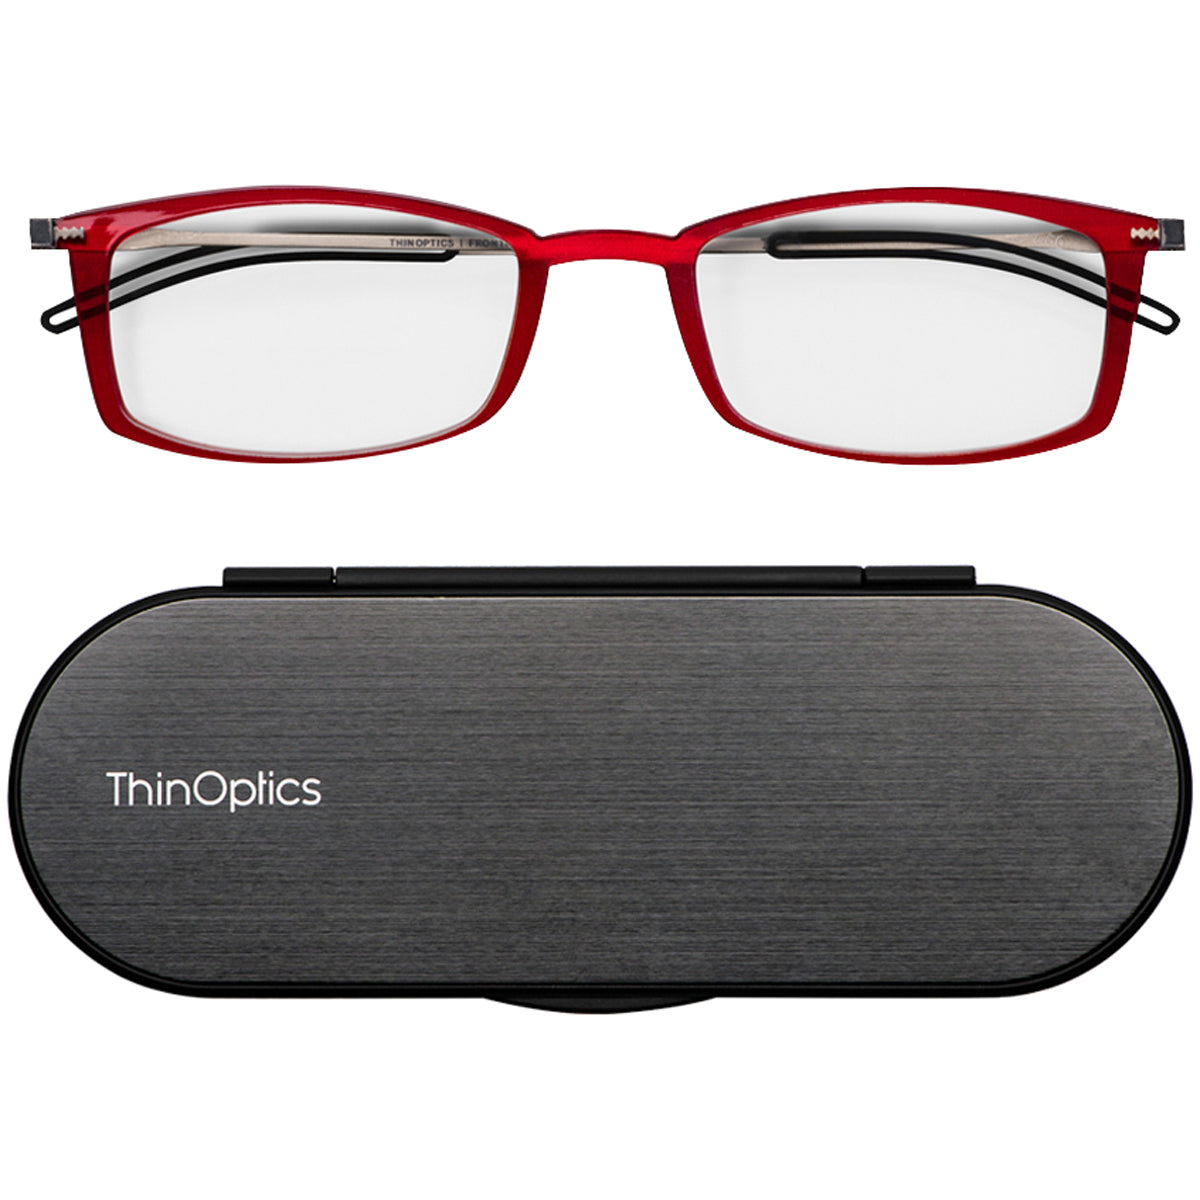 ThinOptics FrontPage Brooklyn Reading Glasses with Milano Case